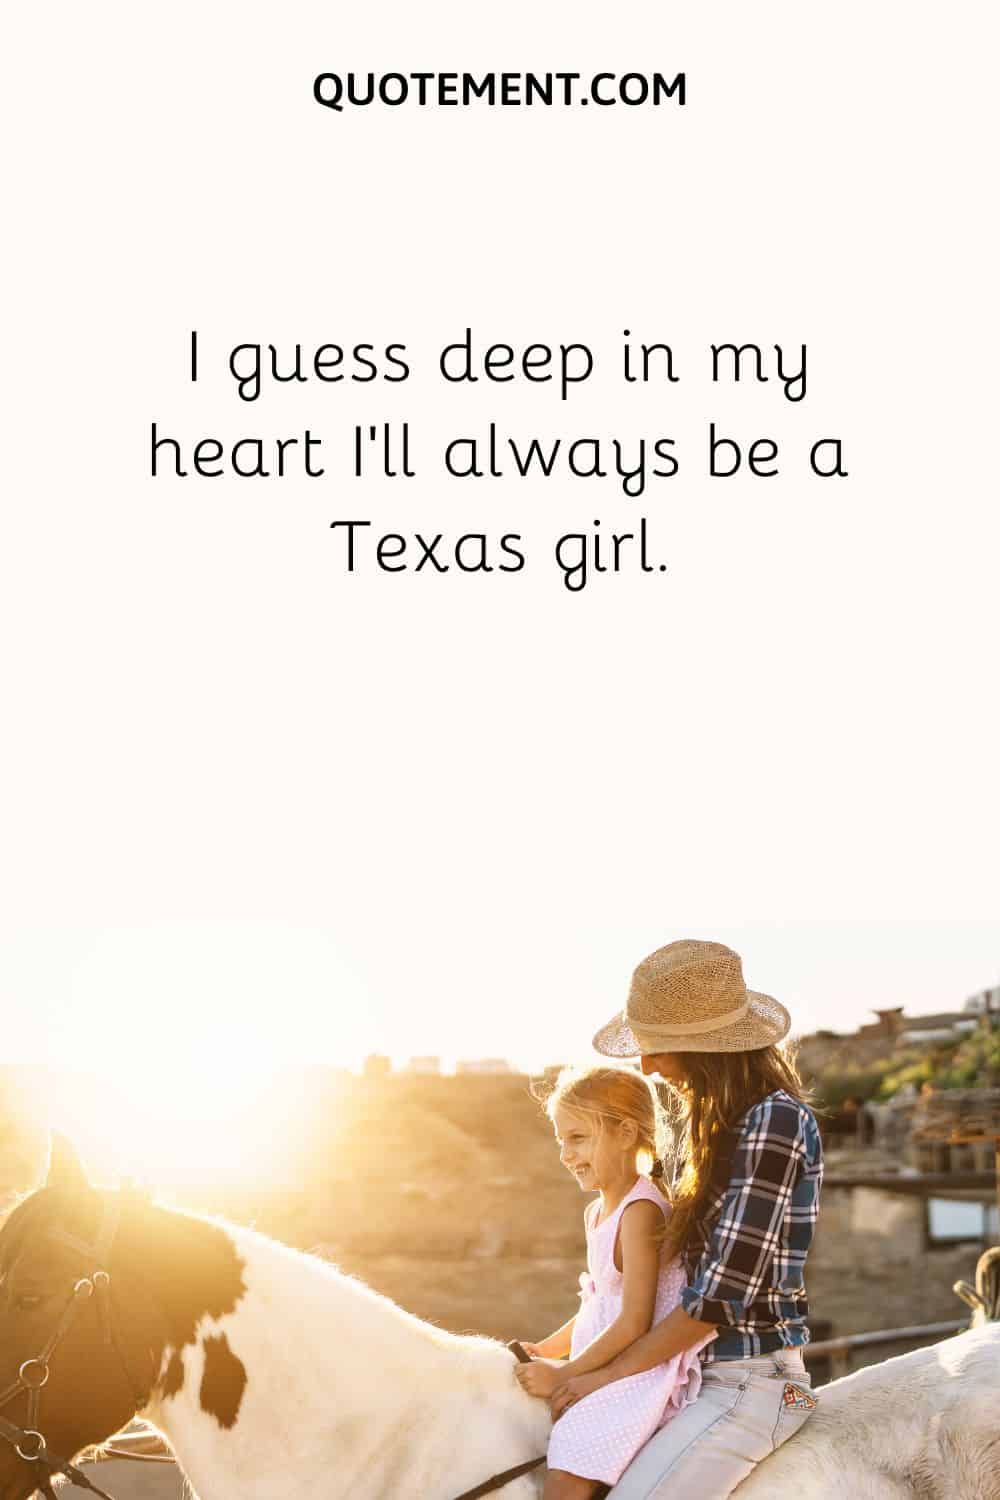 I guess deep in my heart I'll always be a Texas girl.